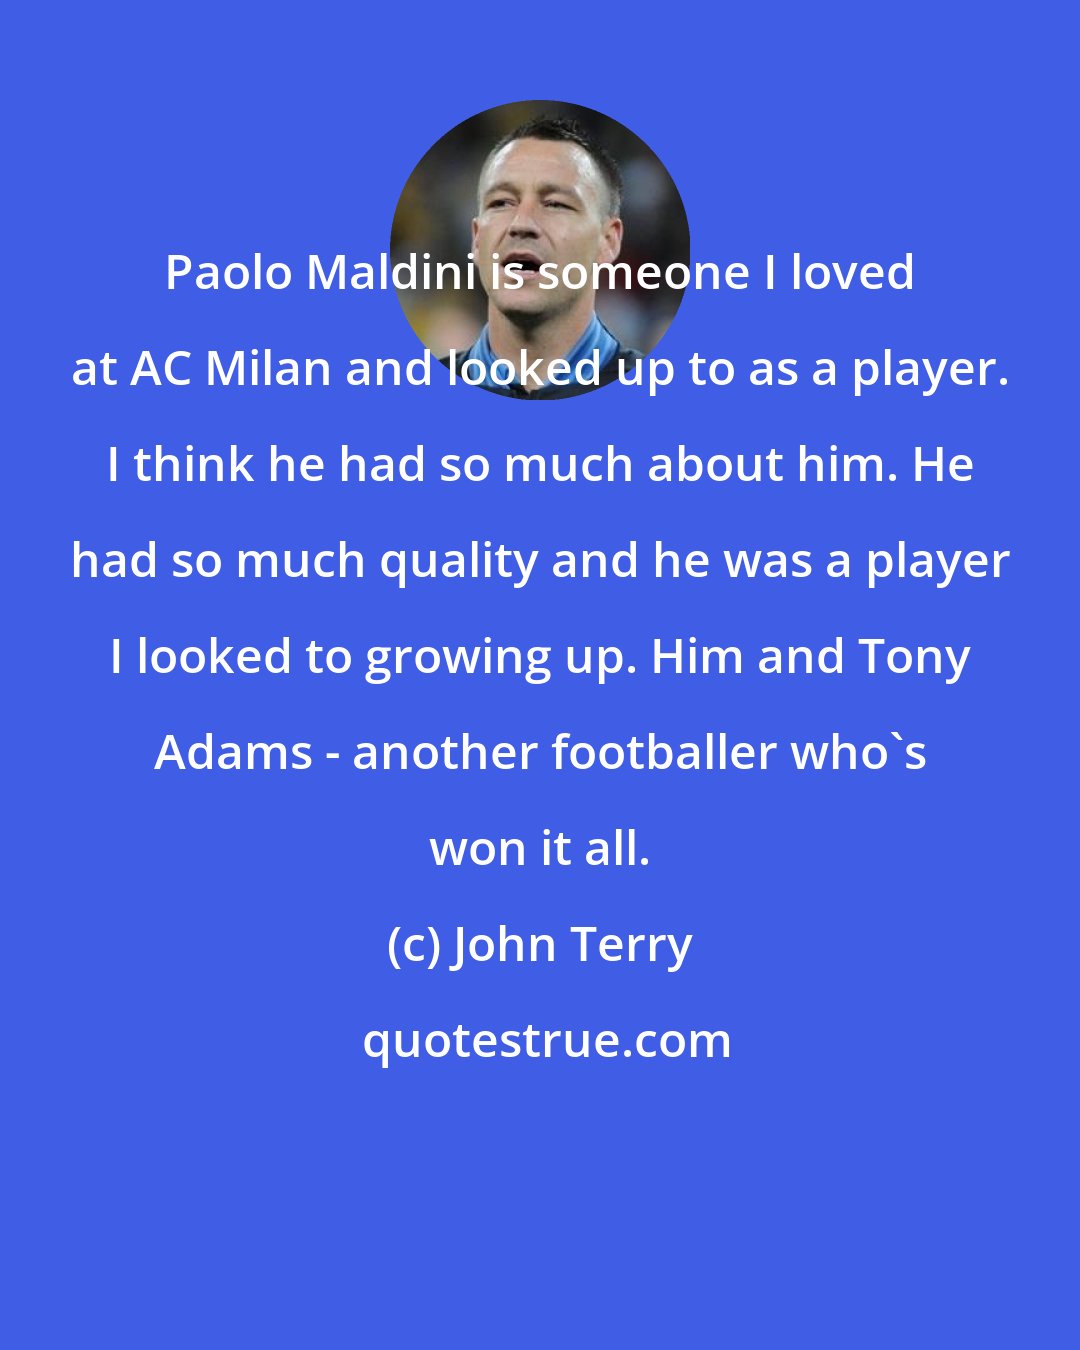 John Terry: Paolo Maldini is someone I loved at AC Milan and looked up to as a player. I think he had so much about him. He had so much quality and he was a player I looked to growing up. Him and Tony Adams - another footballer who's won it all.